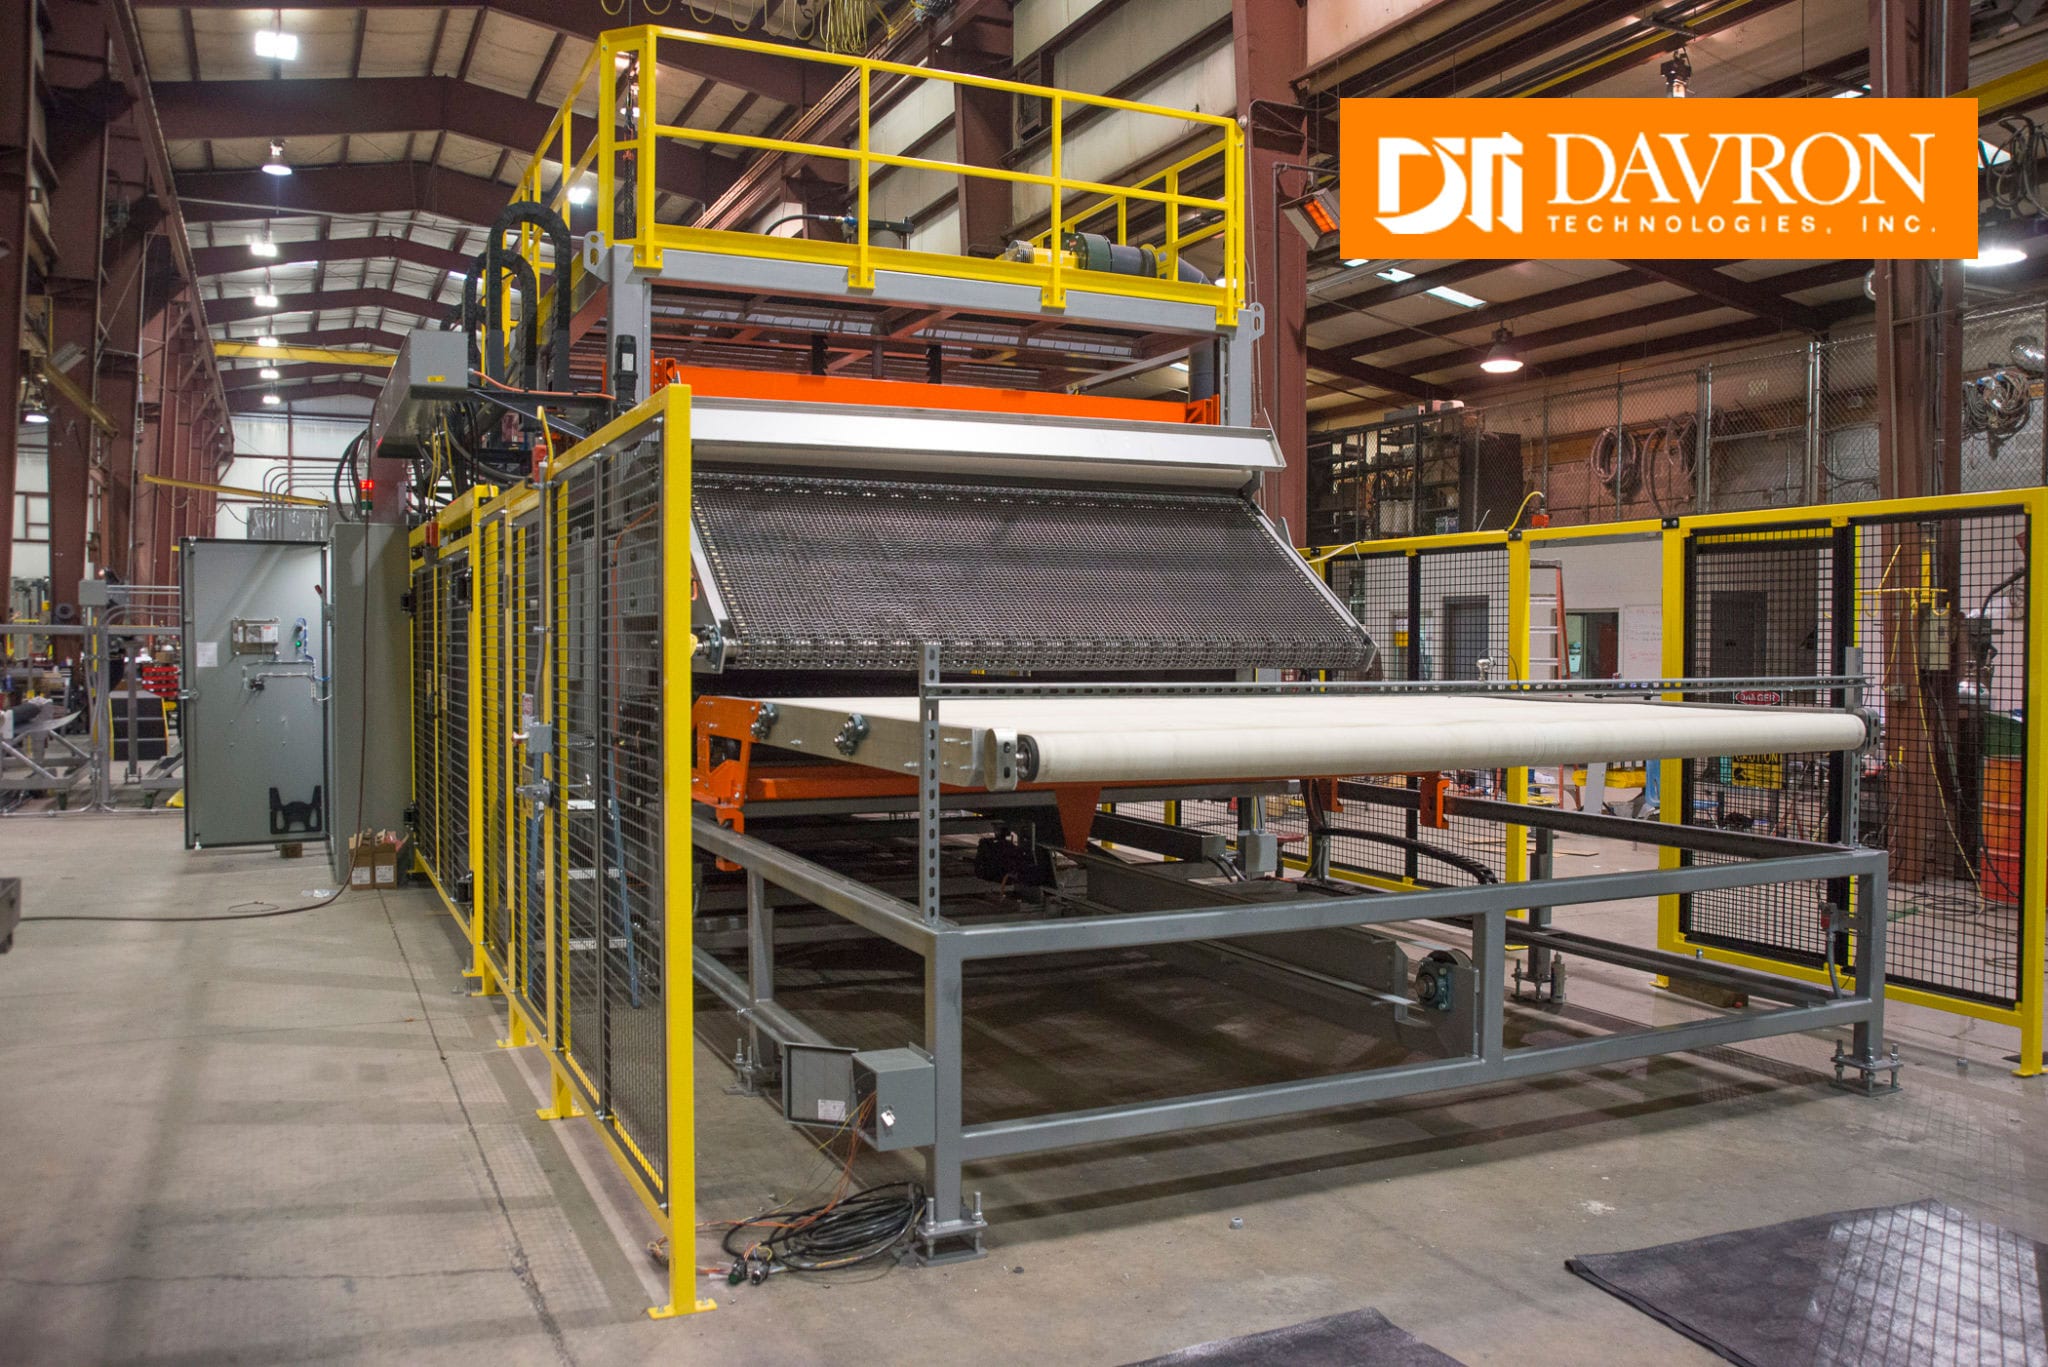 DTI-1340 is a stacked carpet preheat line conveyor oven by Davron